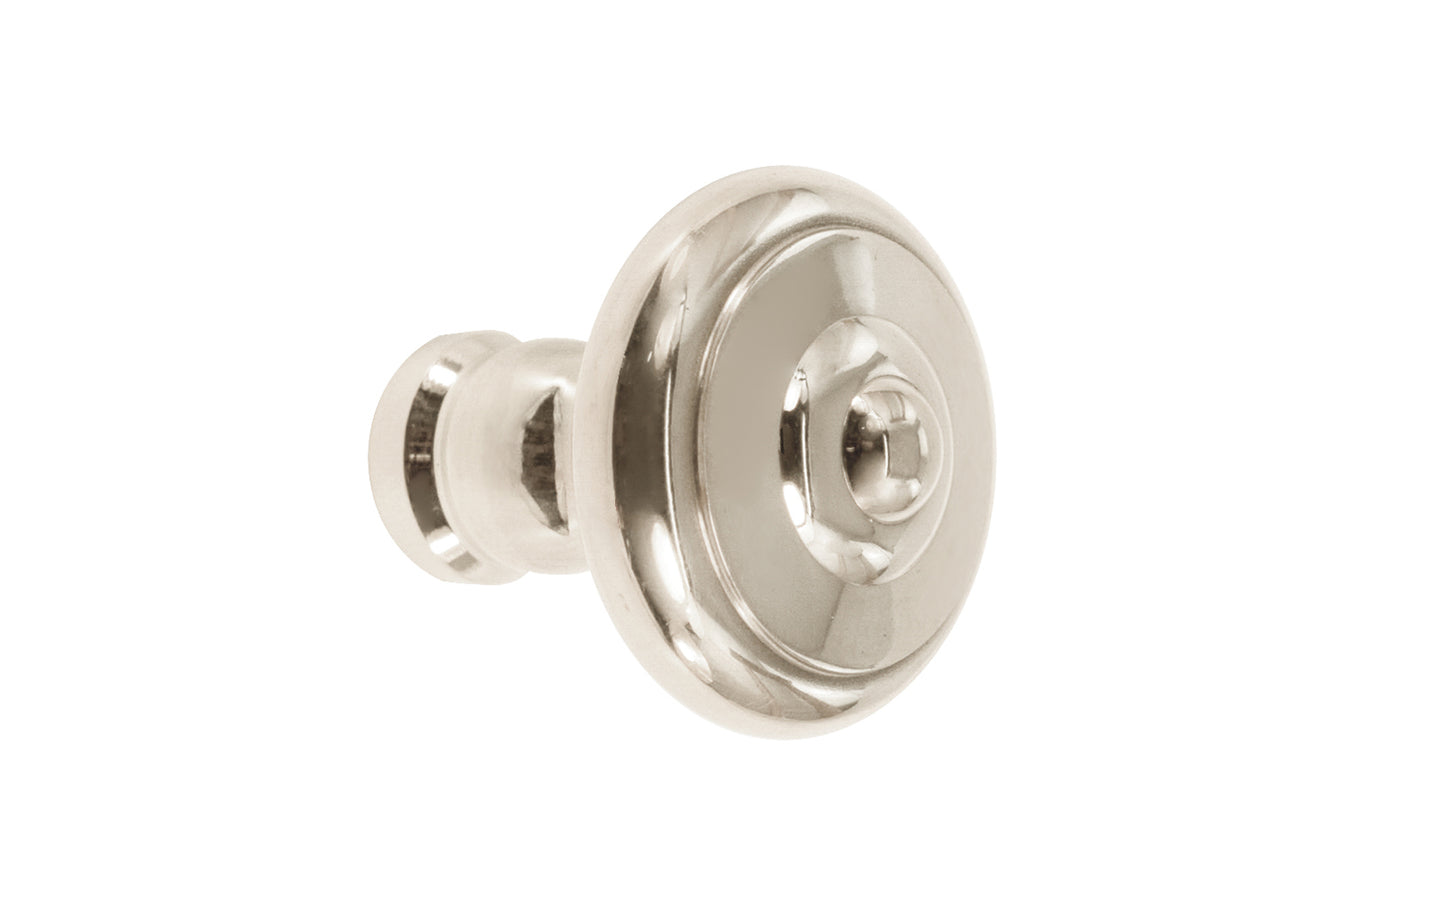 Vintage-style Hardware · Solid Brass classic contemporary style cabinet knob designed in the Mid-Century style. Quality solid brass 1" diameter Knob. Ideal for kitchen & bathroom cabinets, & furniture. Polished nickel finish.